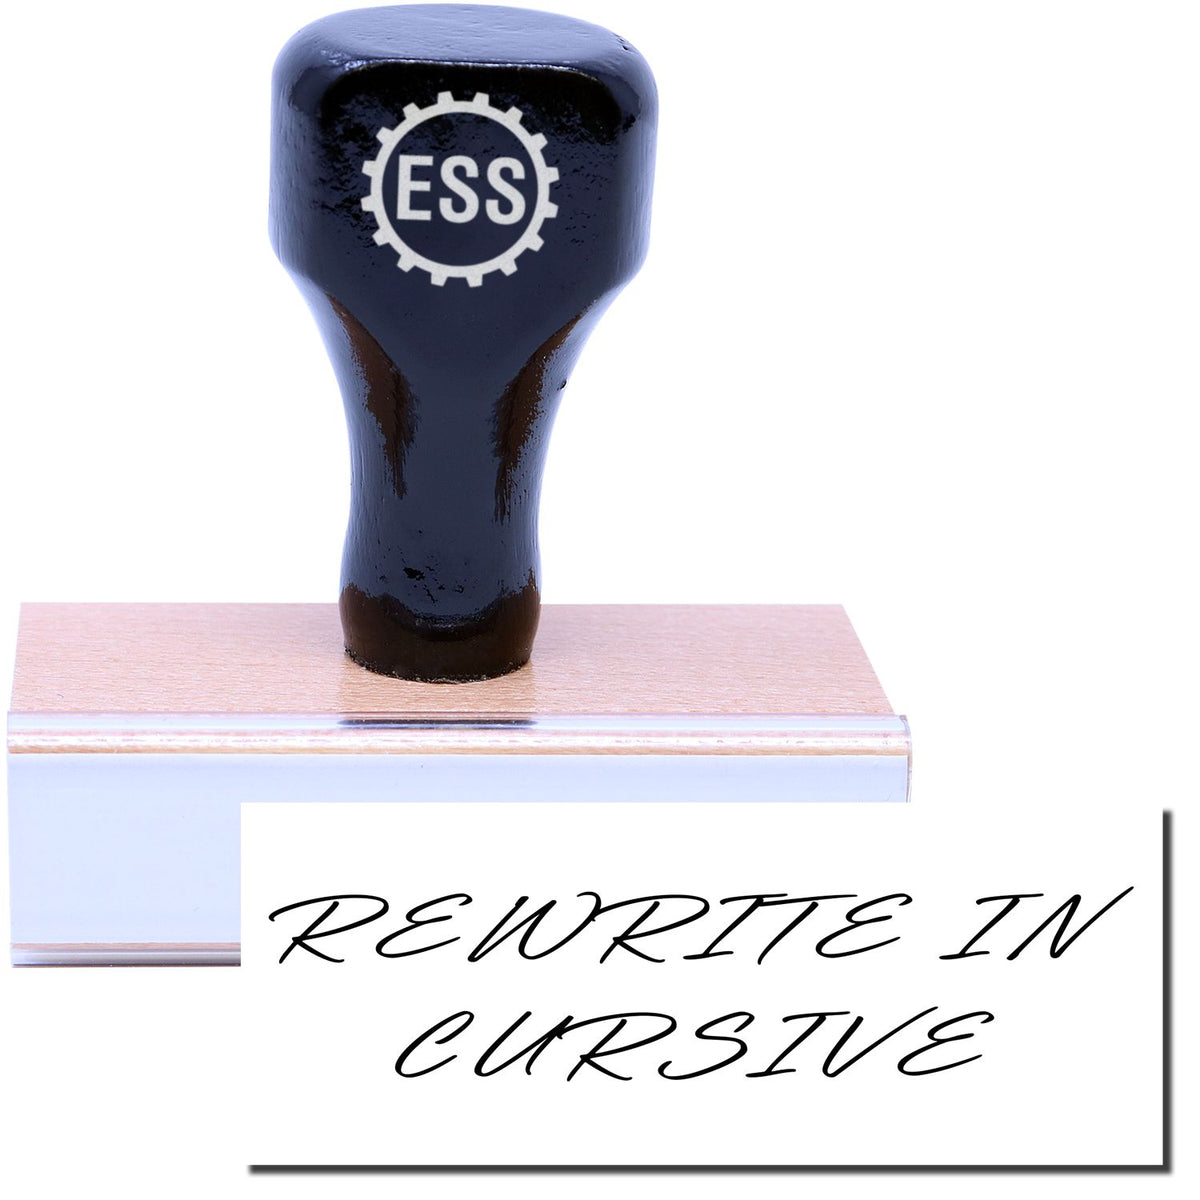 A stock office rubber stamp with a stamped image showing how the text &quot;REWRITE IN CURSIVE&quot; in a large cursive font is displayed after stamping.